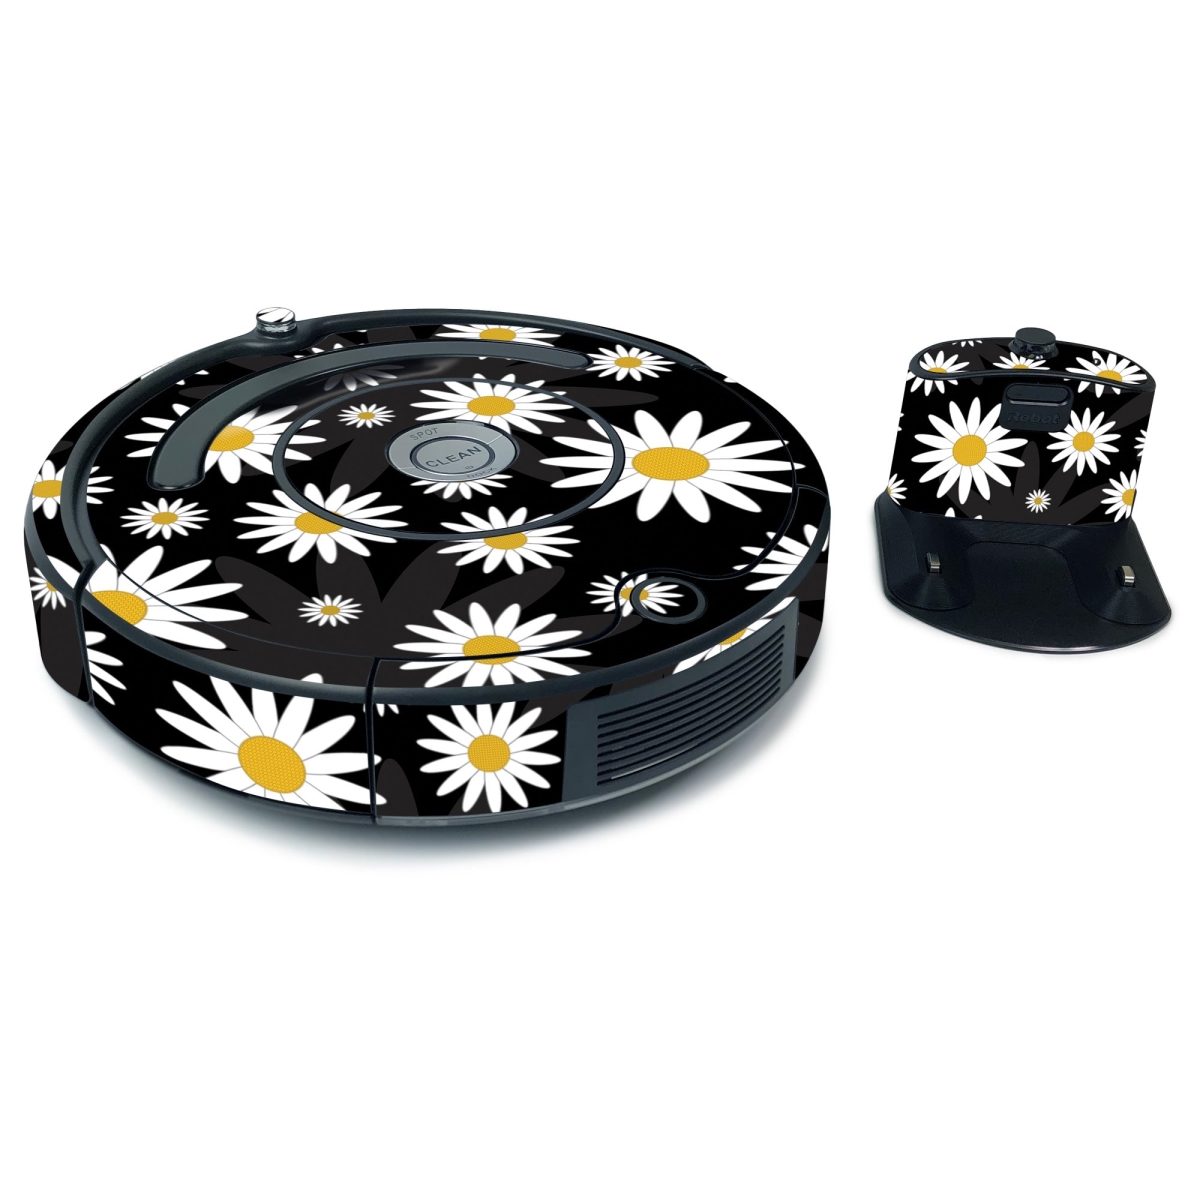 Picture of MightySkins IRRO675-Daisies Skin for iRobot Roomba 675 Max Coverage - Daisies